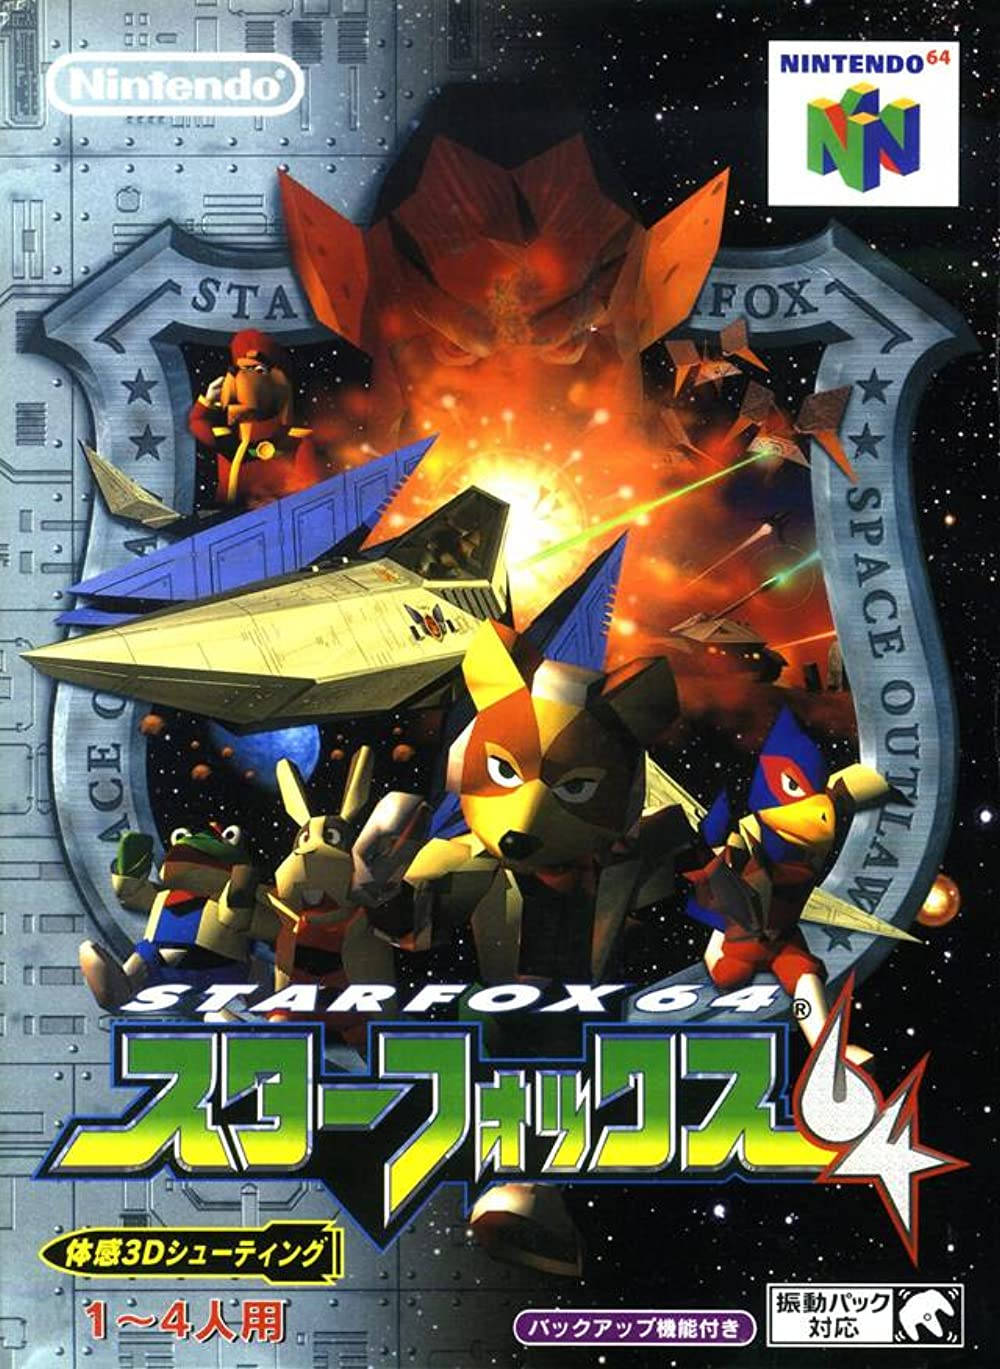 Star Fox 64 Game Poster